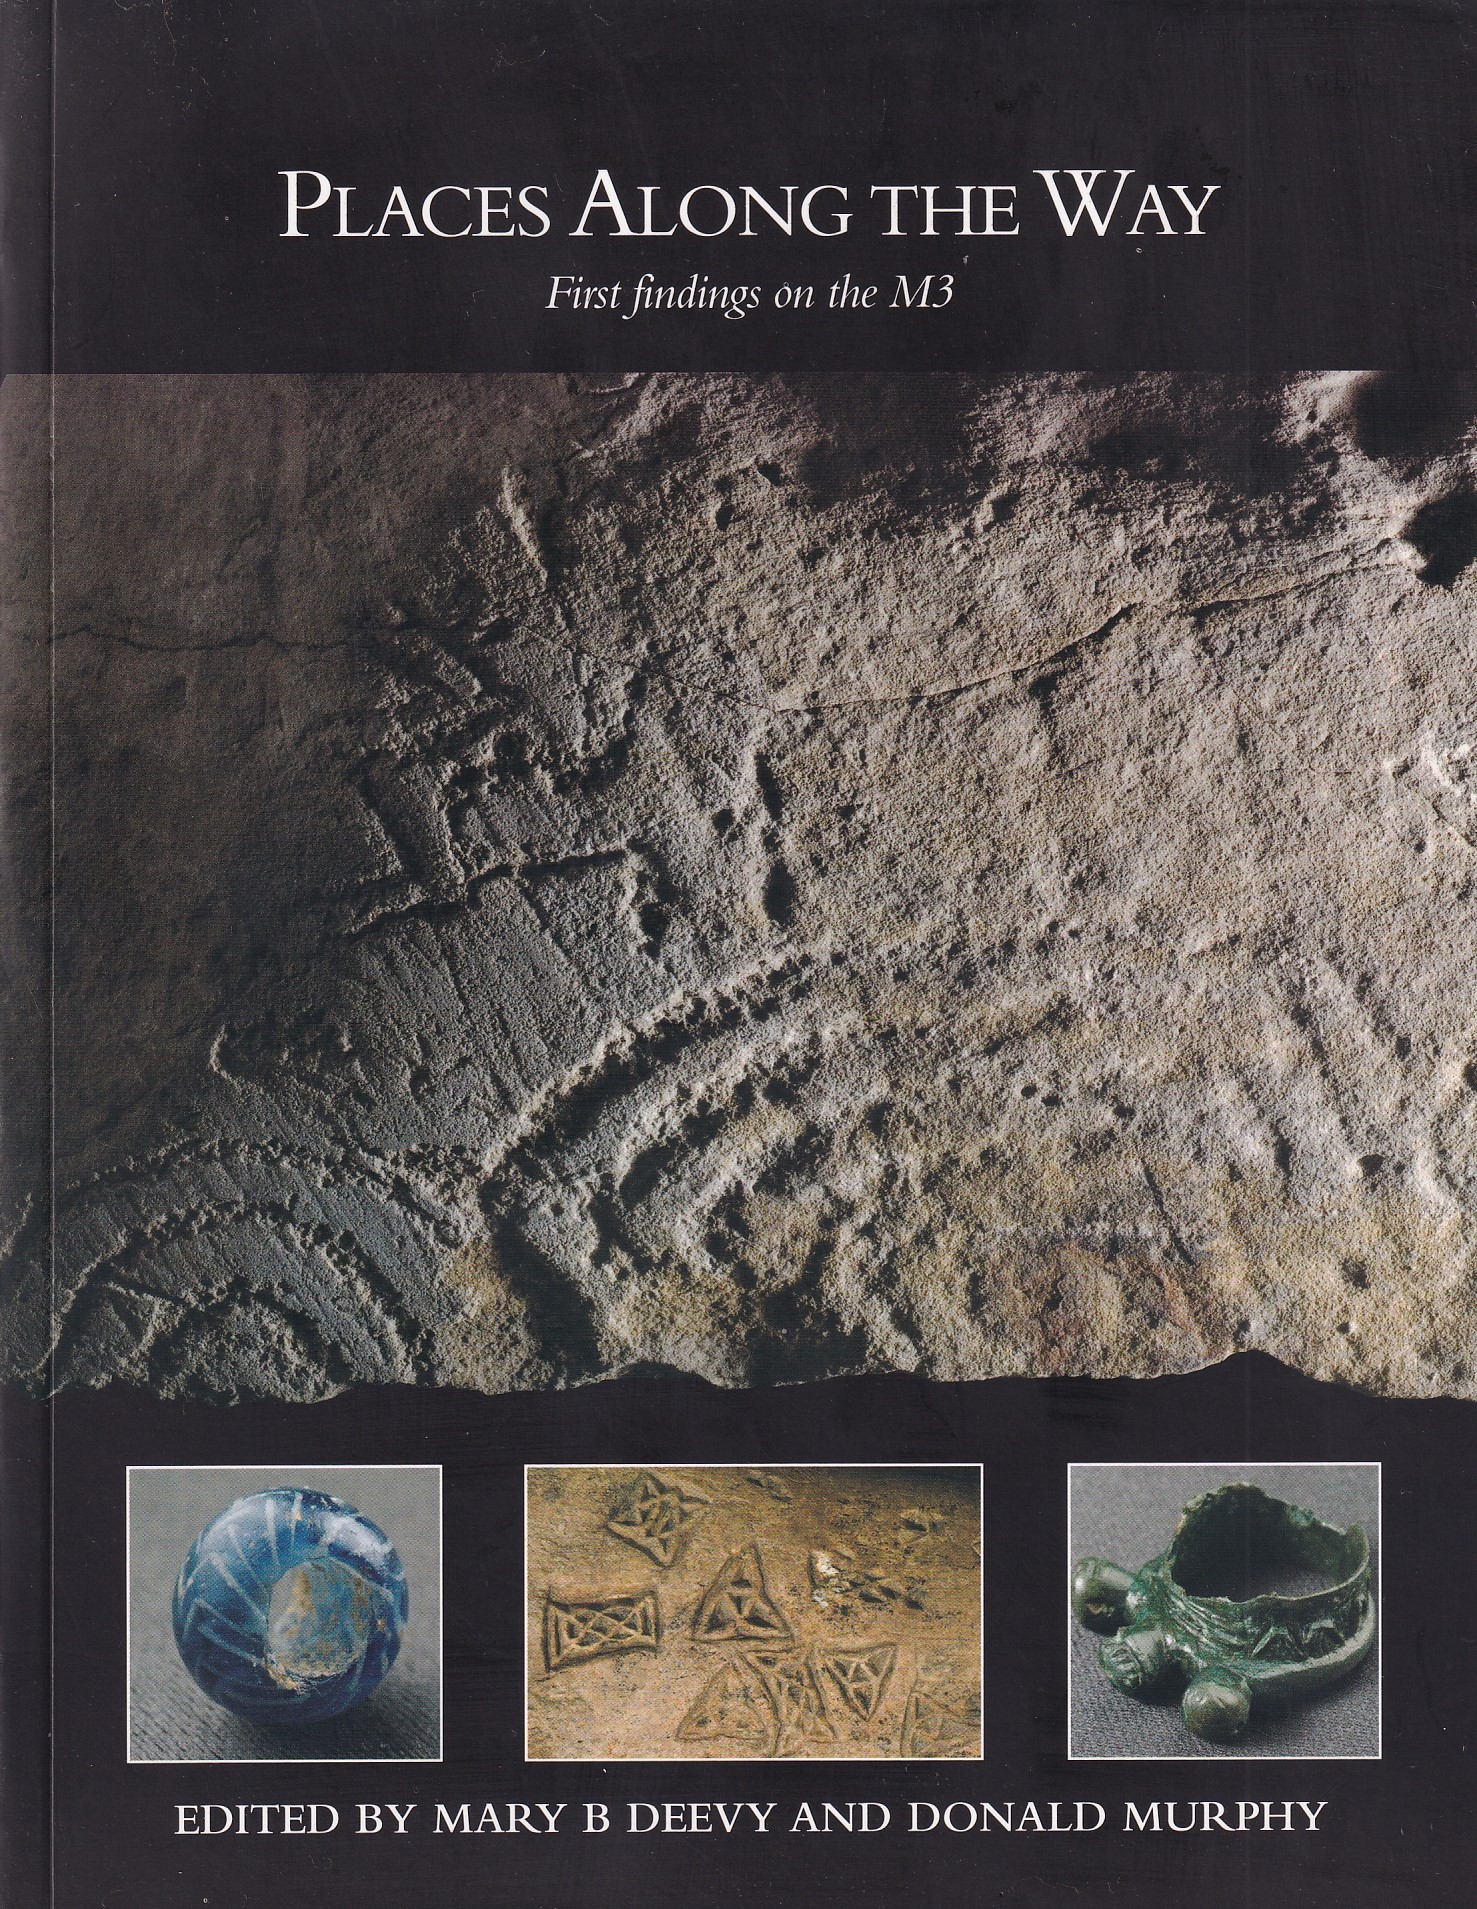 Places Along the Way: First Findings on the M3 | Mary B Deevy & Donald Murphy (eds.) | Charlie Byrne's